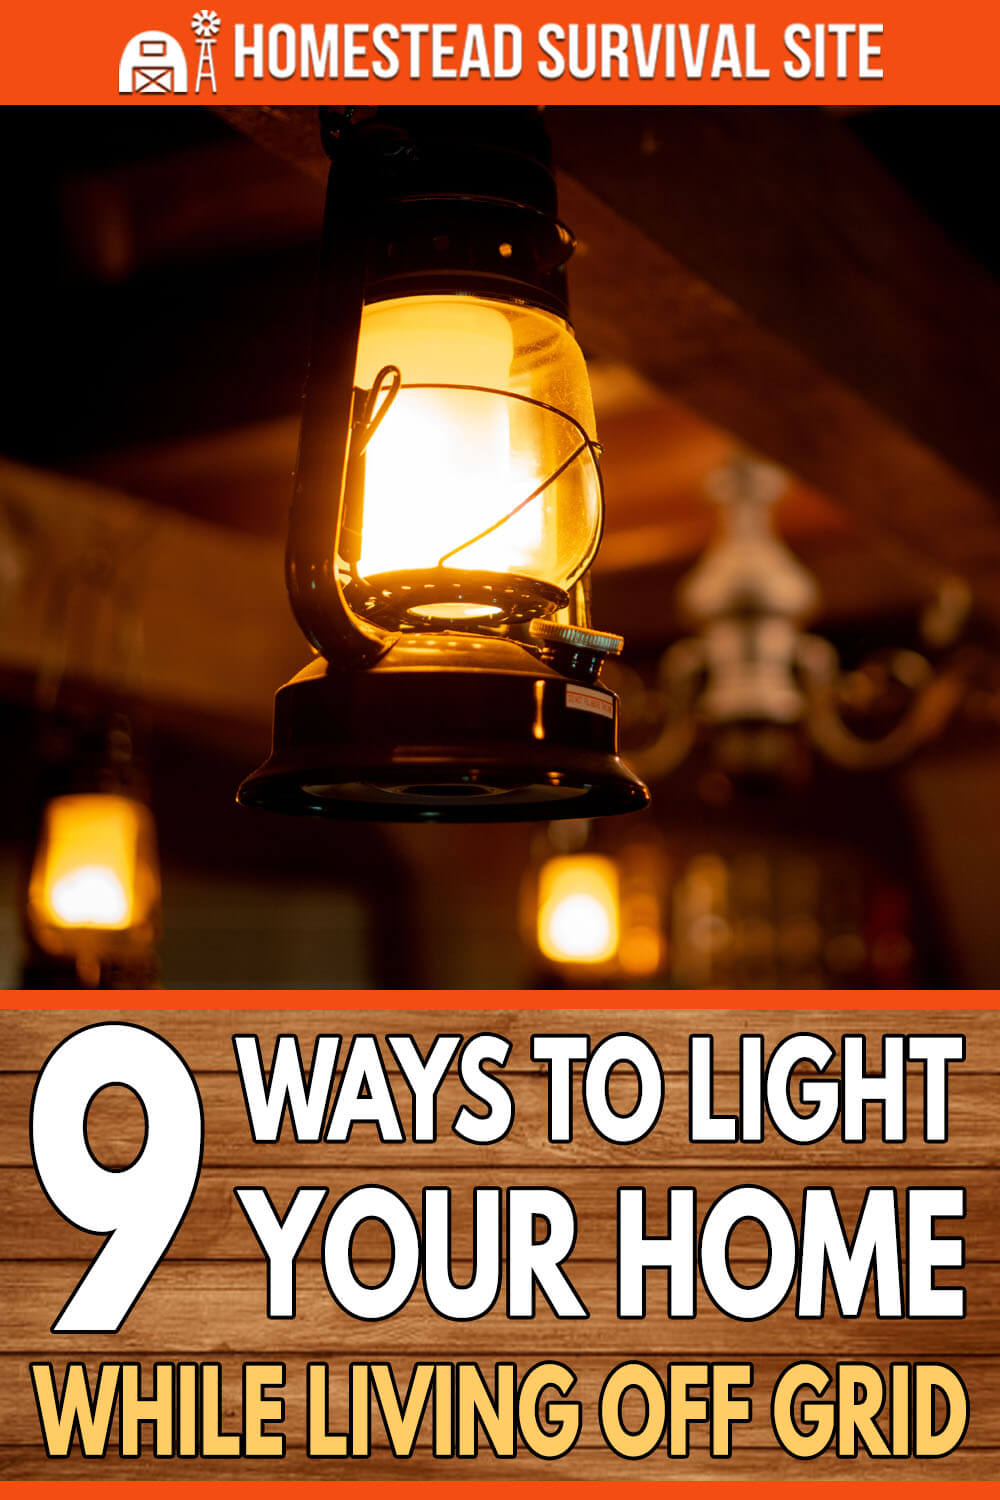 9 Ways to Light Your Home While Living Off Grid